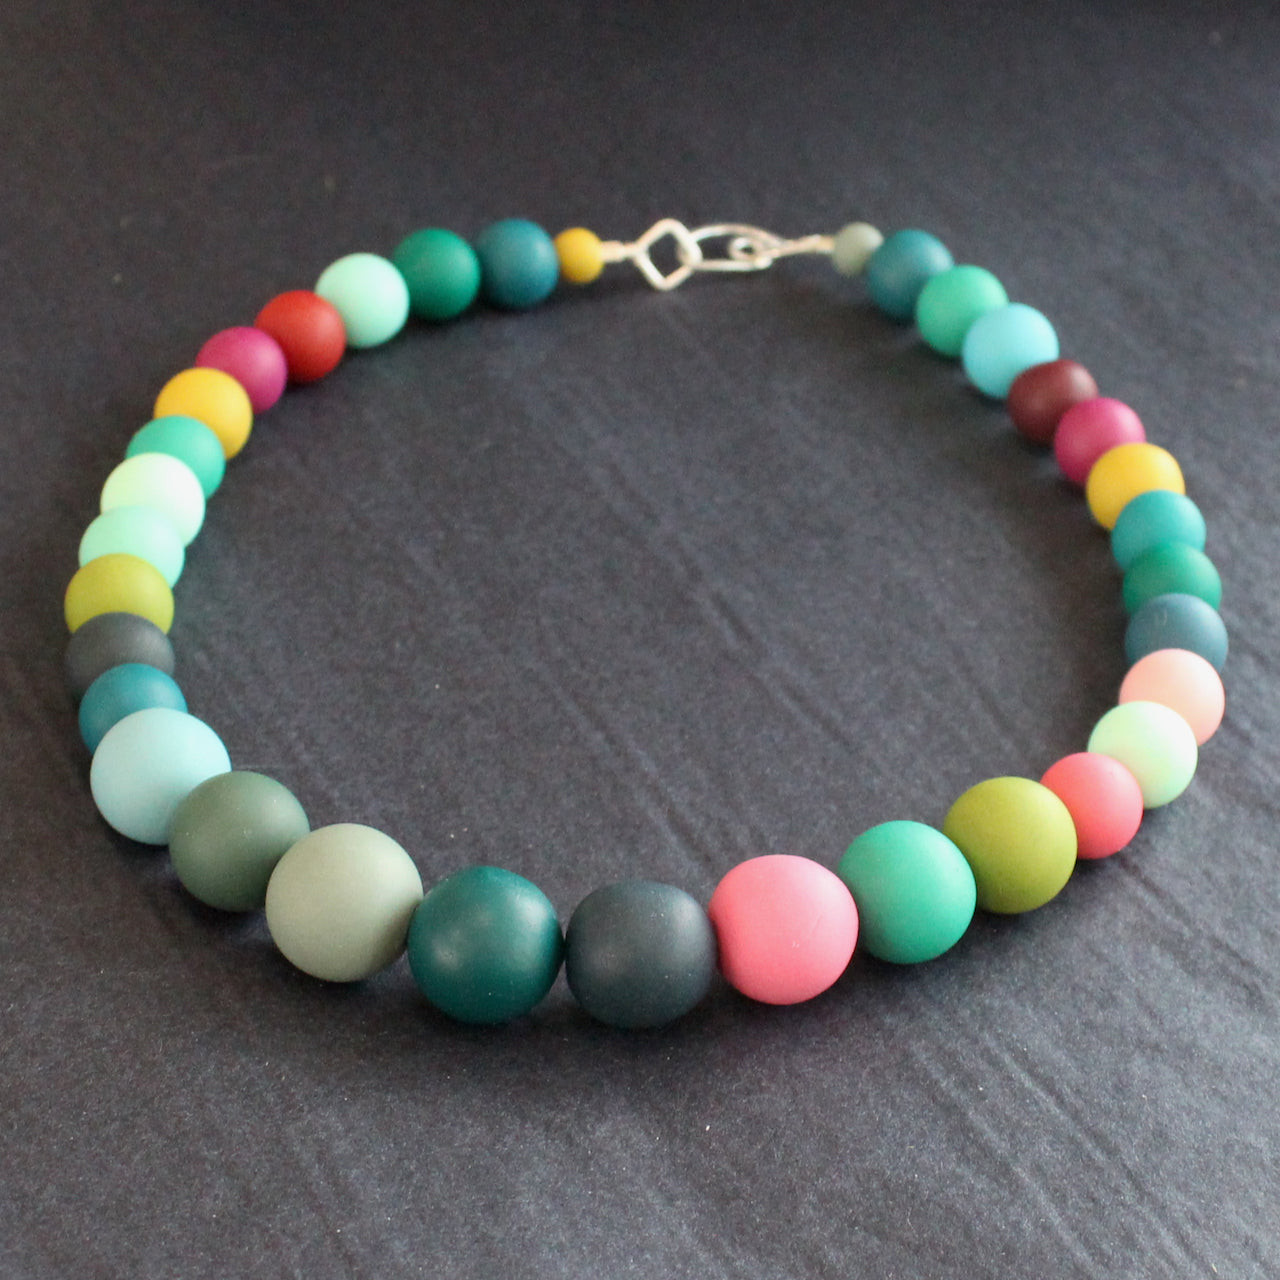 Claire Lloyd necklace of round beads in greens, pinks, blues and yellow 